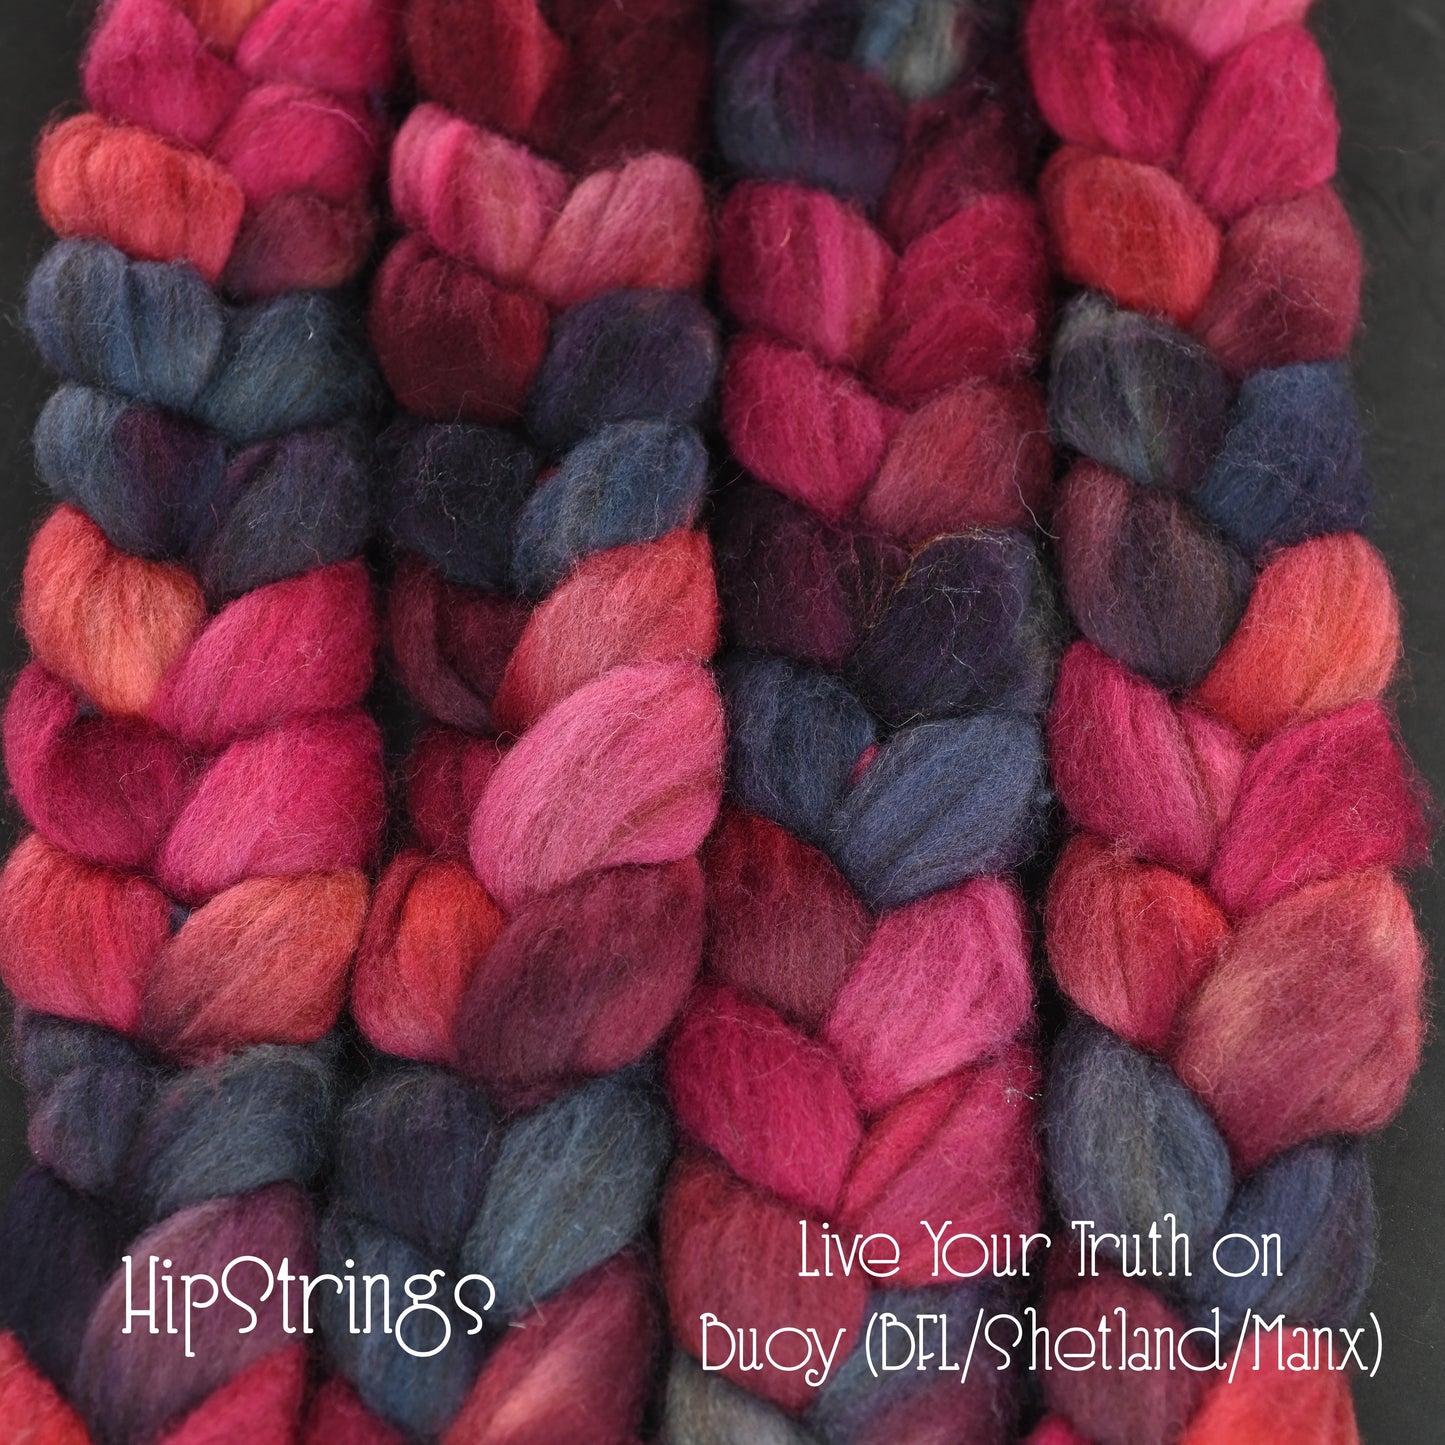 Live your Truth - Hand Dyed Buoy (BFL/Shetland/Manx) Signature Blend - 4 oz